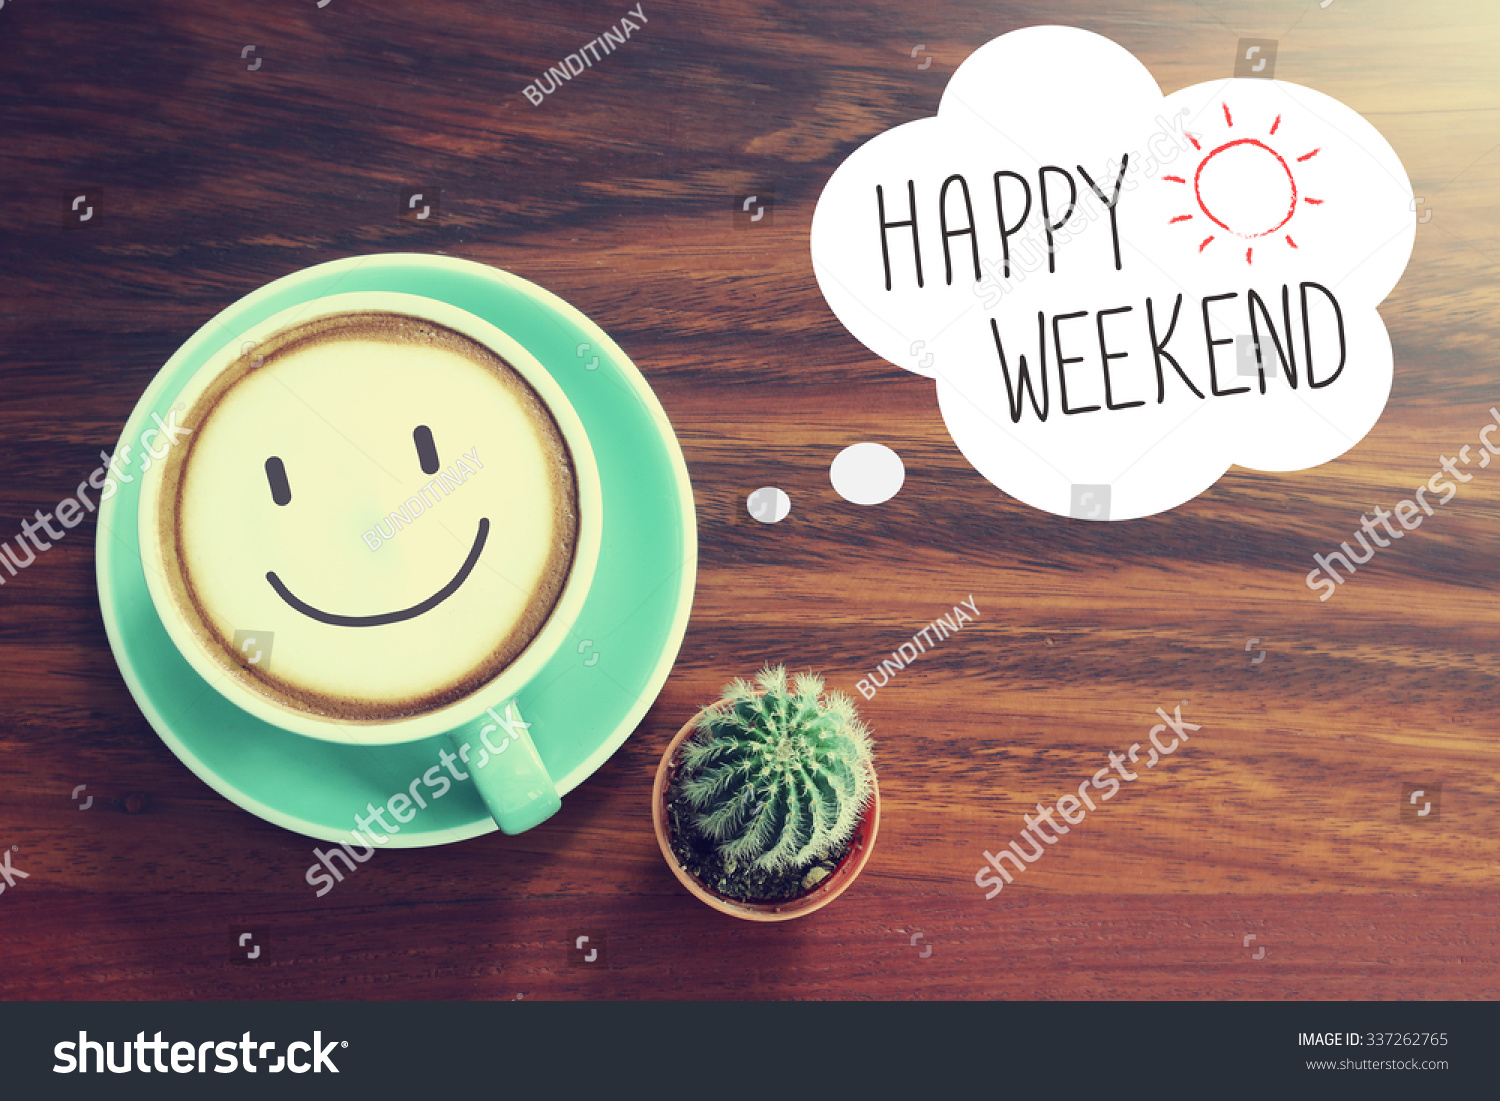 Happy Weekend coffee cup background with vintage filter #337262765